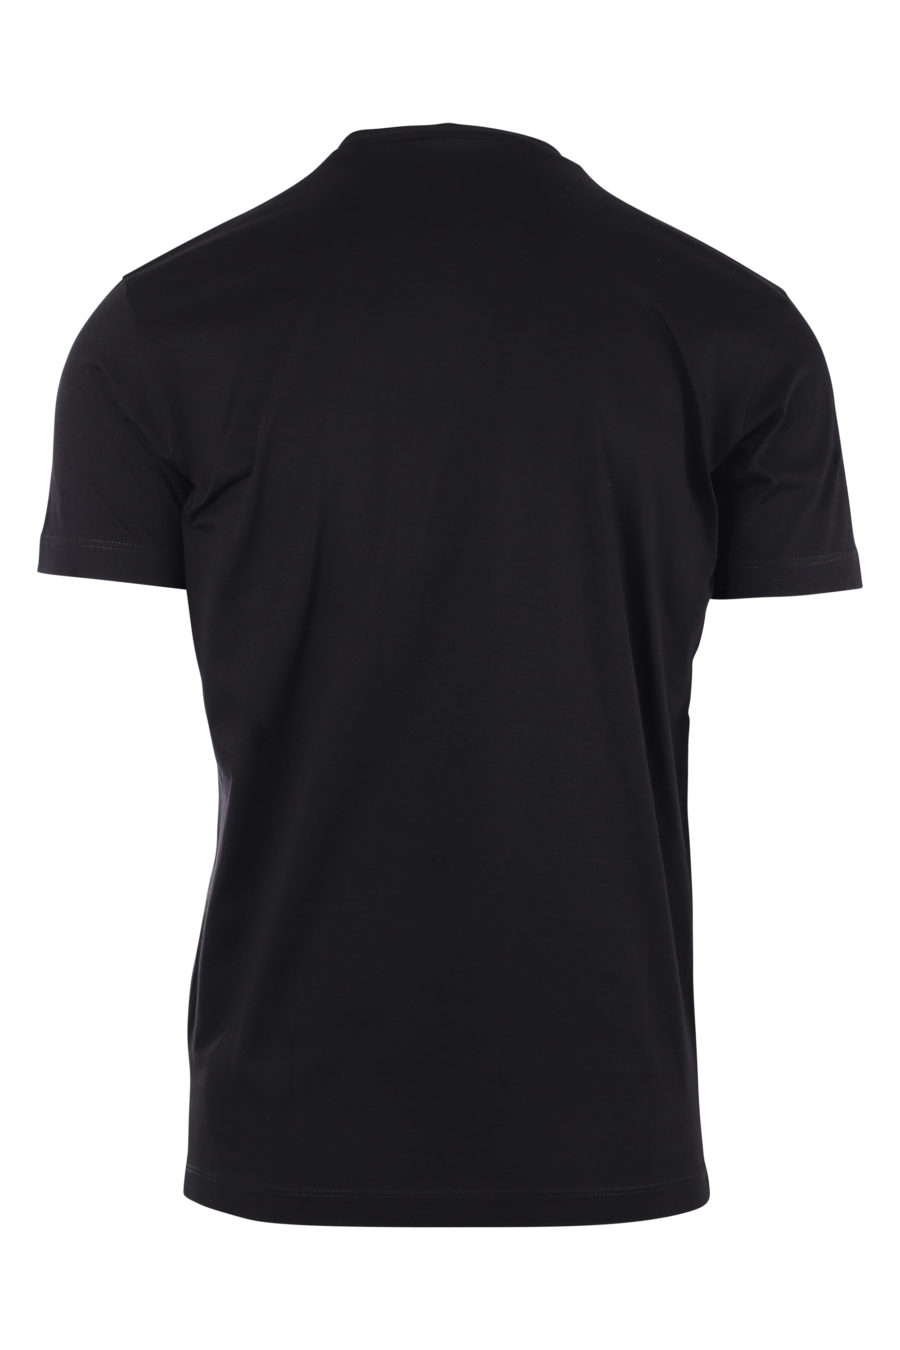 T-shirt black with logo ceresio 9 - IMG 9728